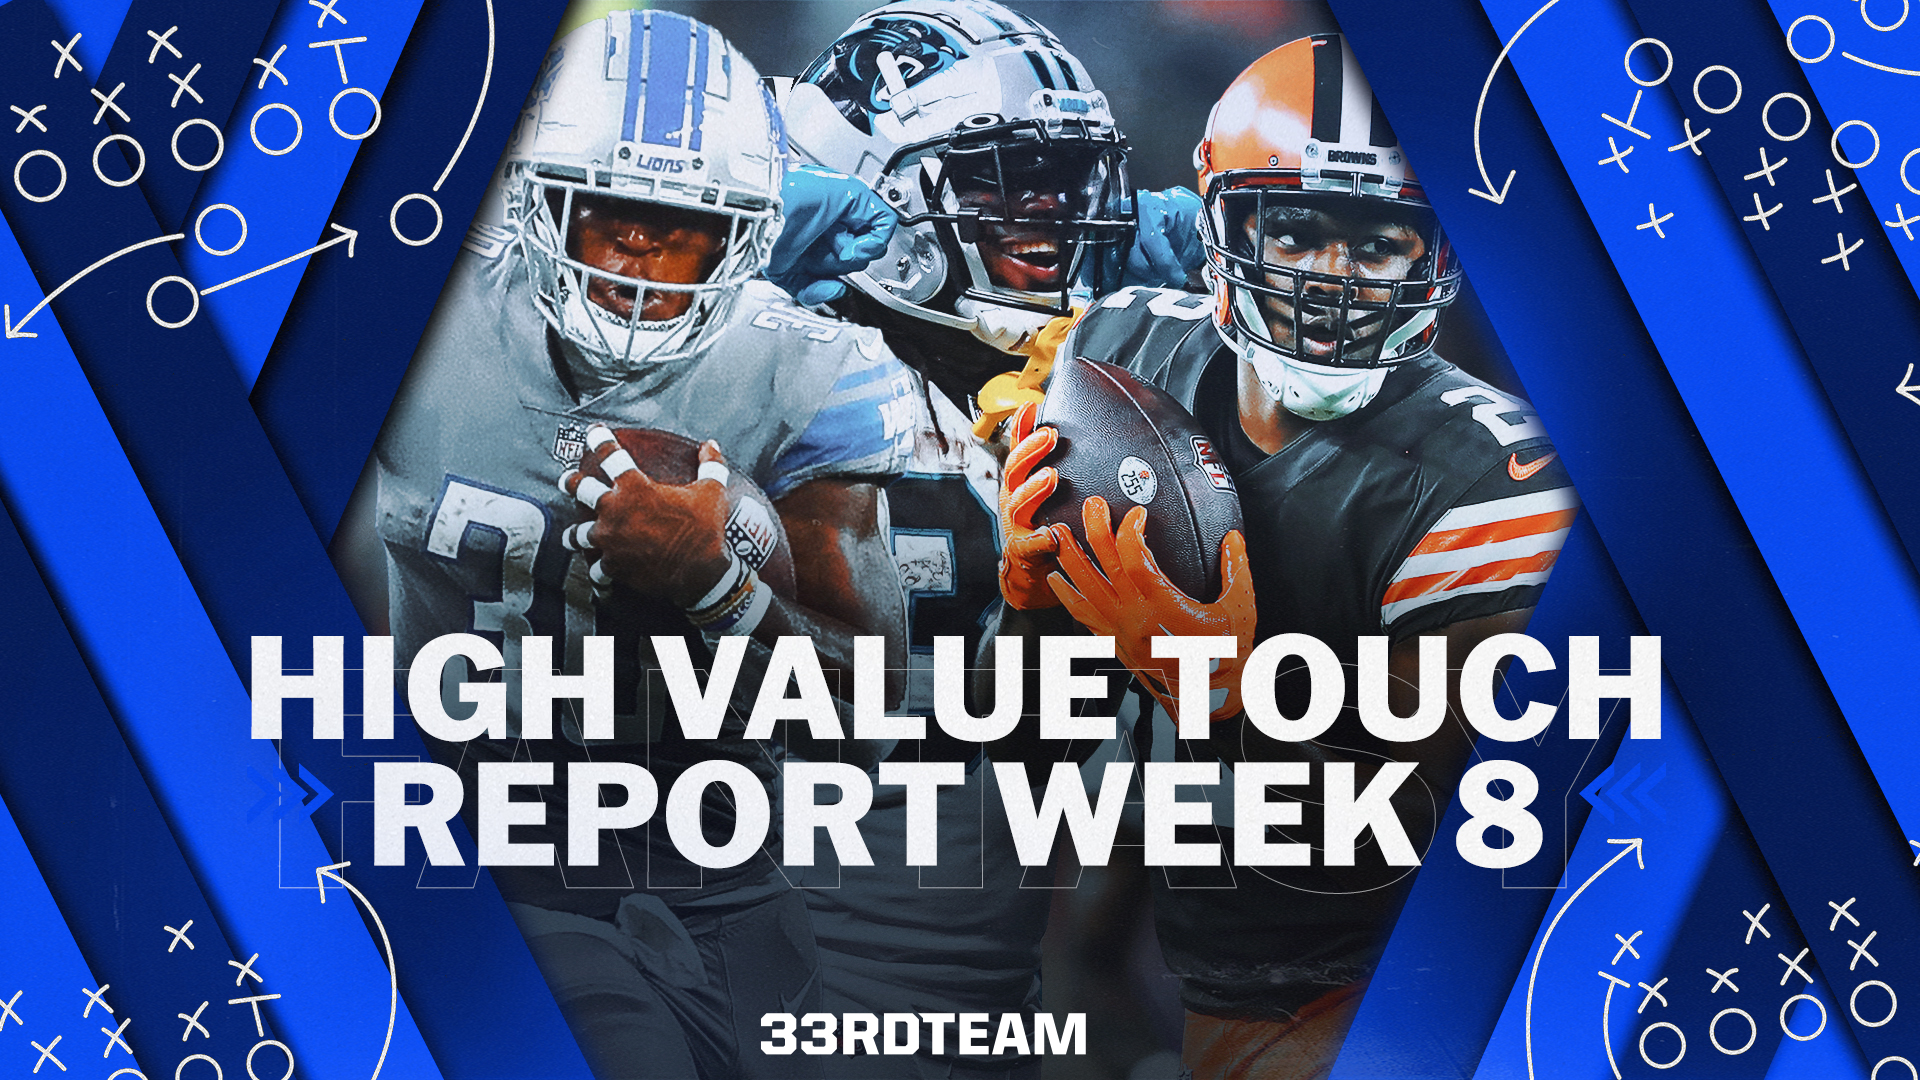 High-Value Touch Report: Week 8 Fantasy Football Rushing & Receiving Data